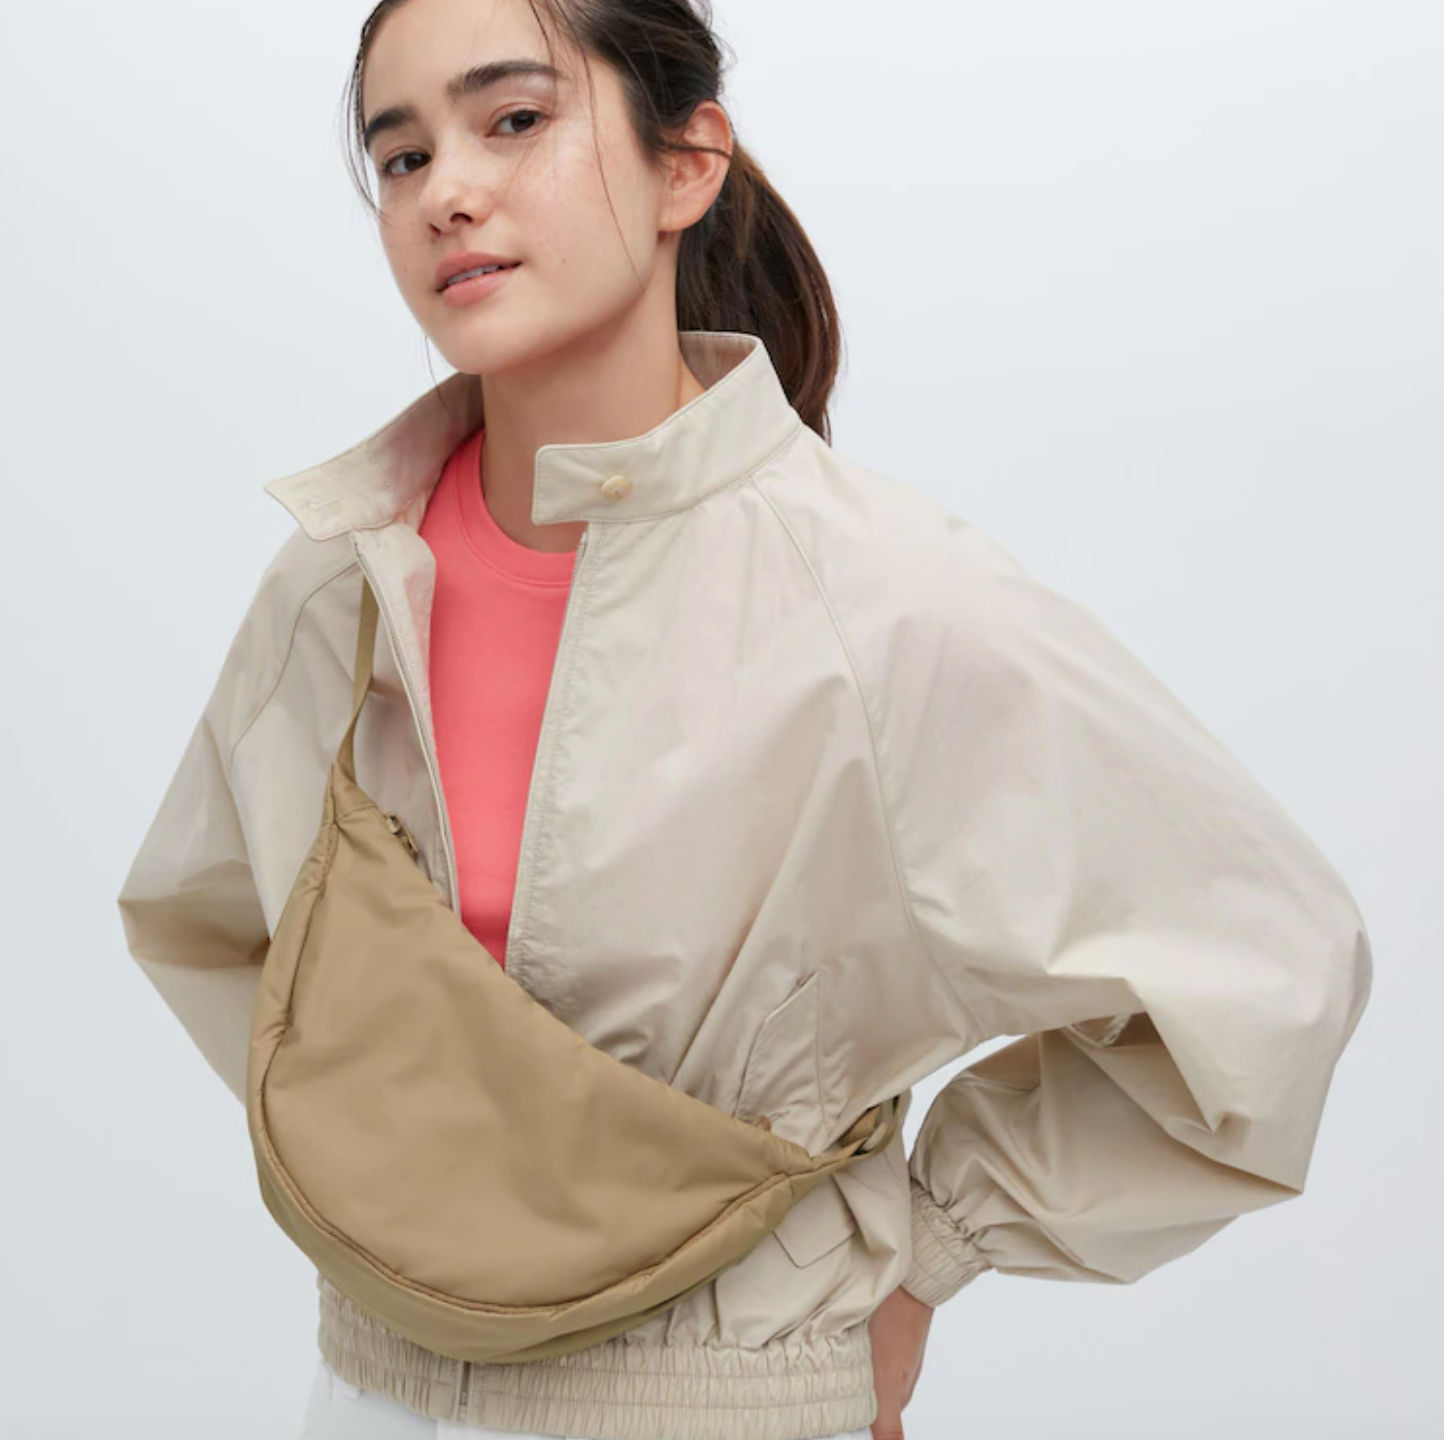 The Uniqlo Shoulder Bag is The MostWanted Product of 2023  Glamour UK